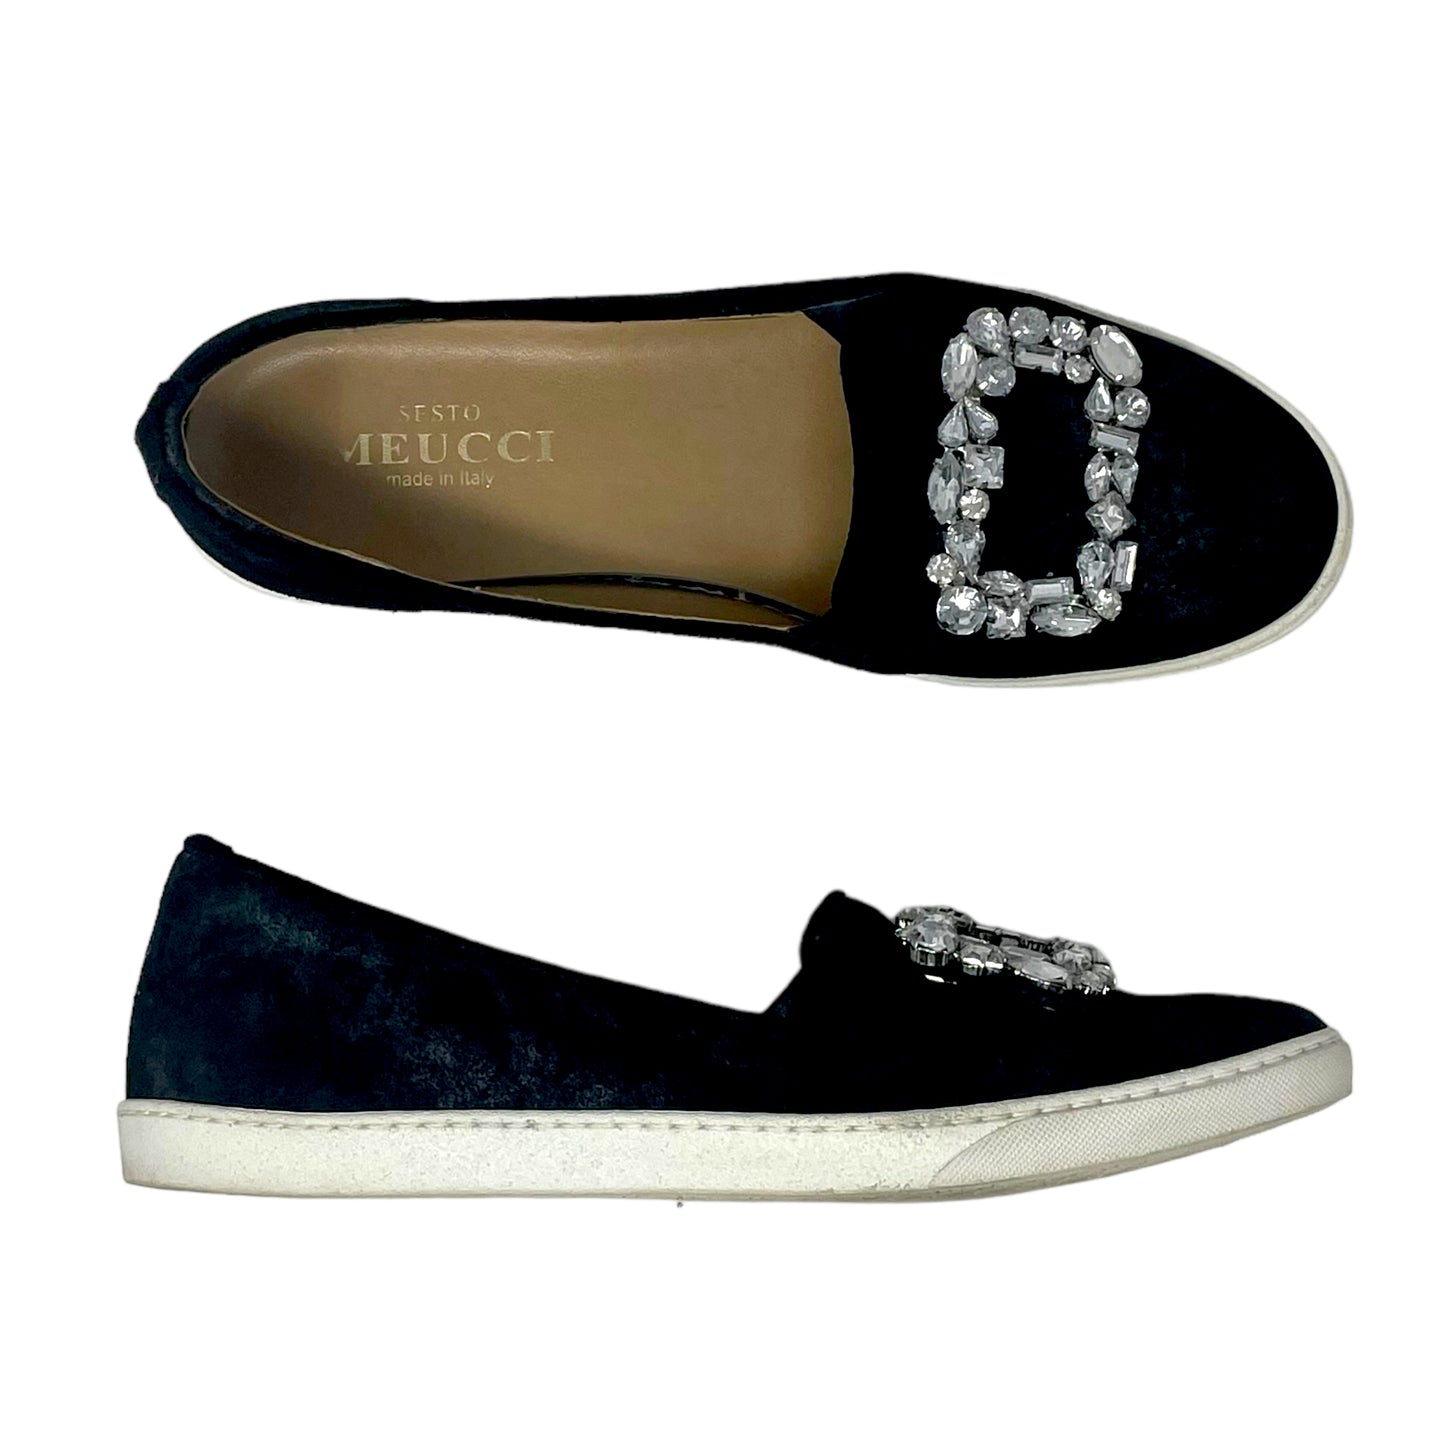 Shoes Flats Boat By Sesto Meucci  Size: 7